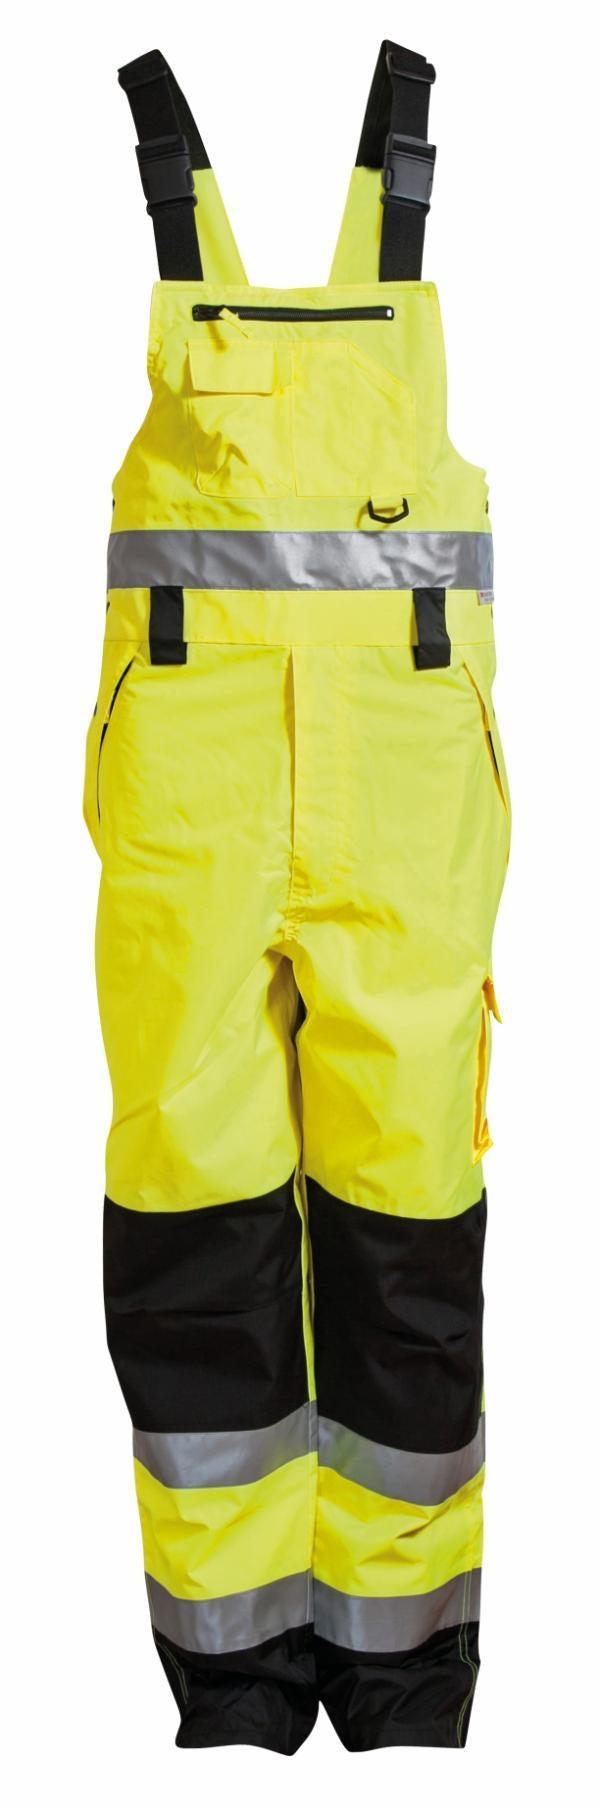 ELKA VISIBLE EXTREME OVERALL - Overalls - JA Profil 